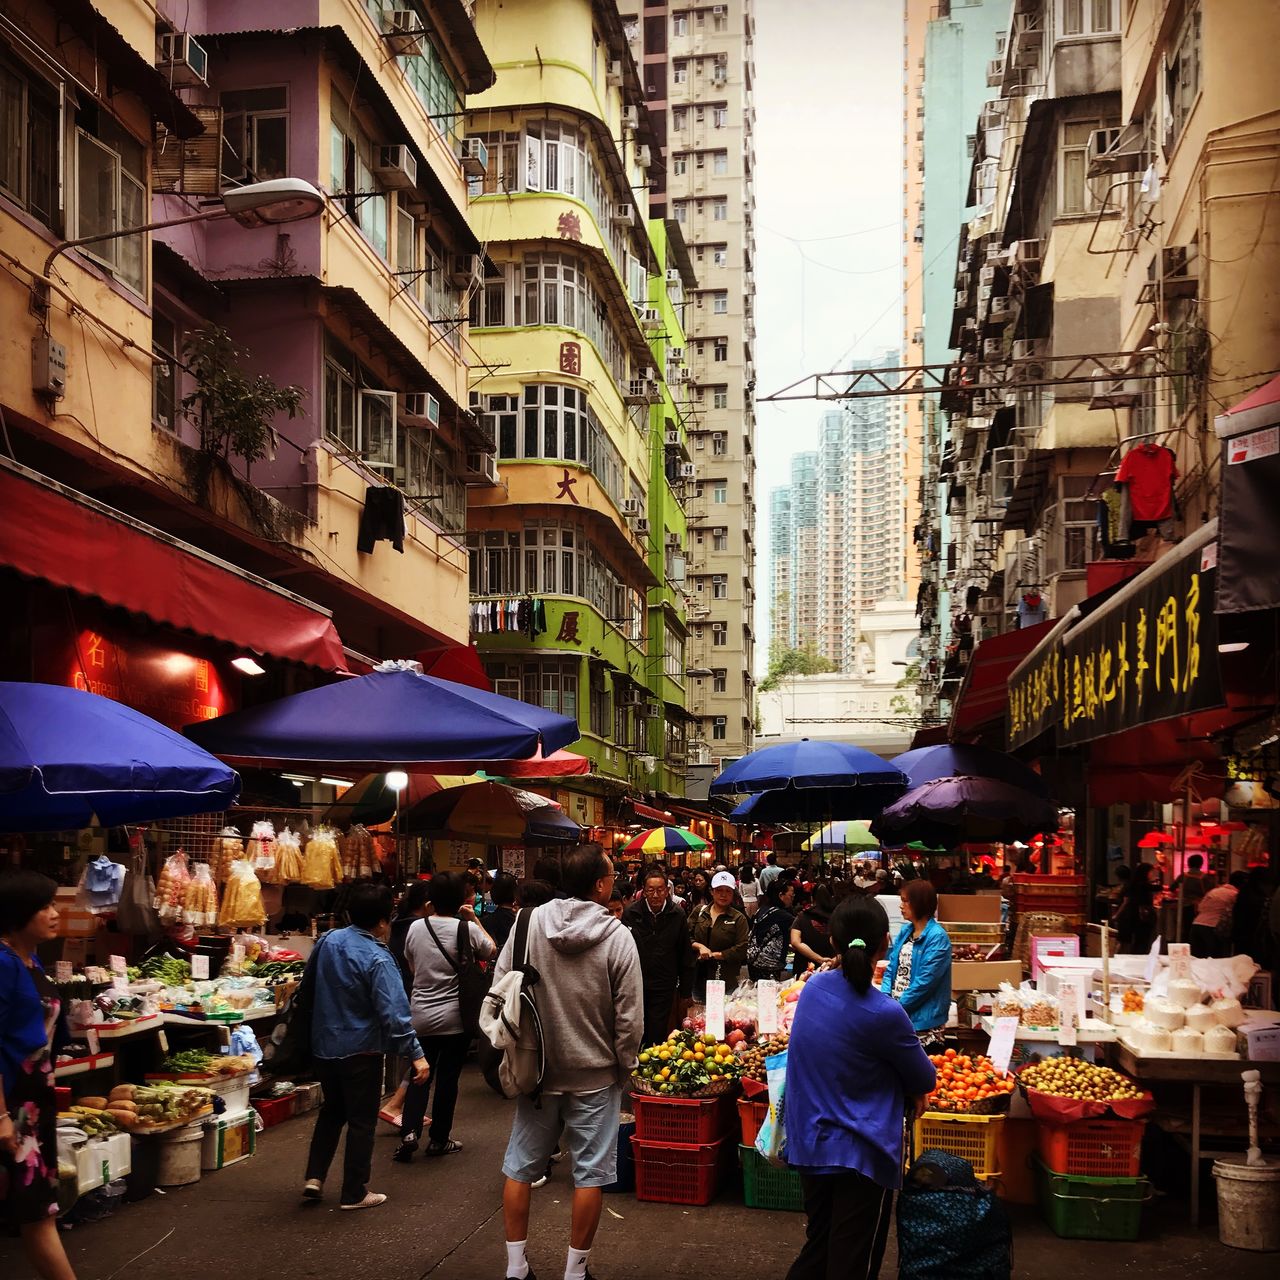 Market in Hong Kong. Urban decisions of food consumption, sanitation infrastructure, and support for the reuse of properly treated organic waste in agriculture impact the entire food chain. 